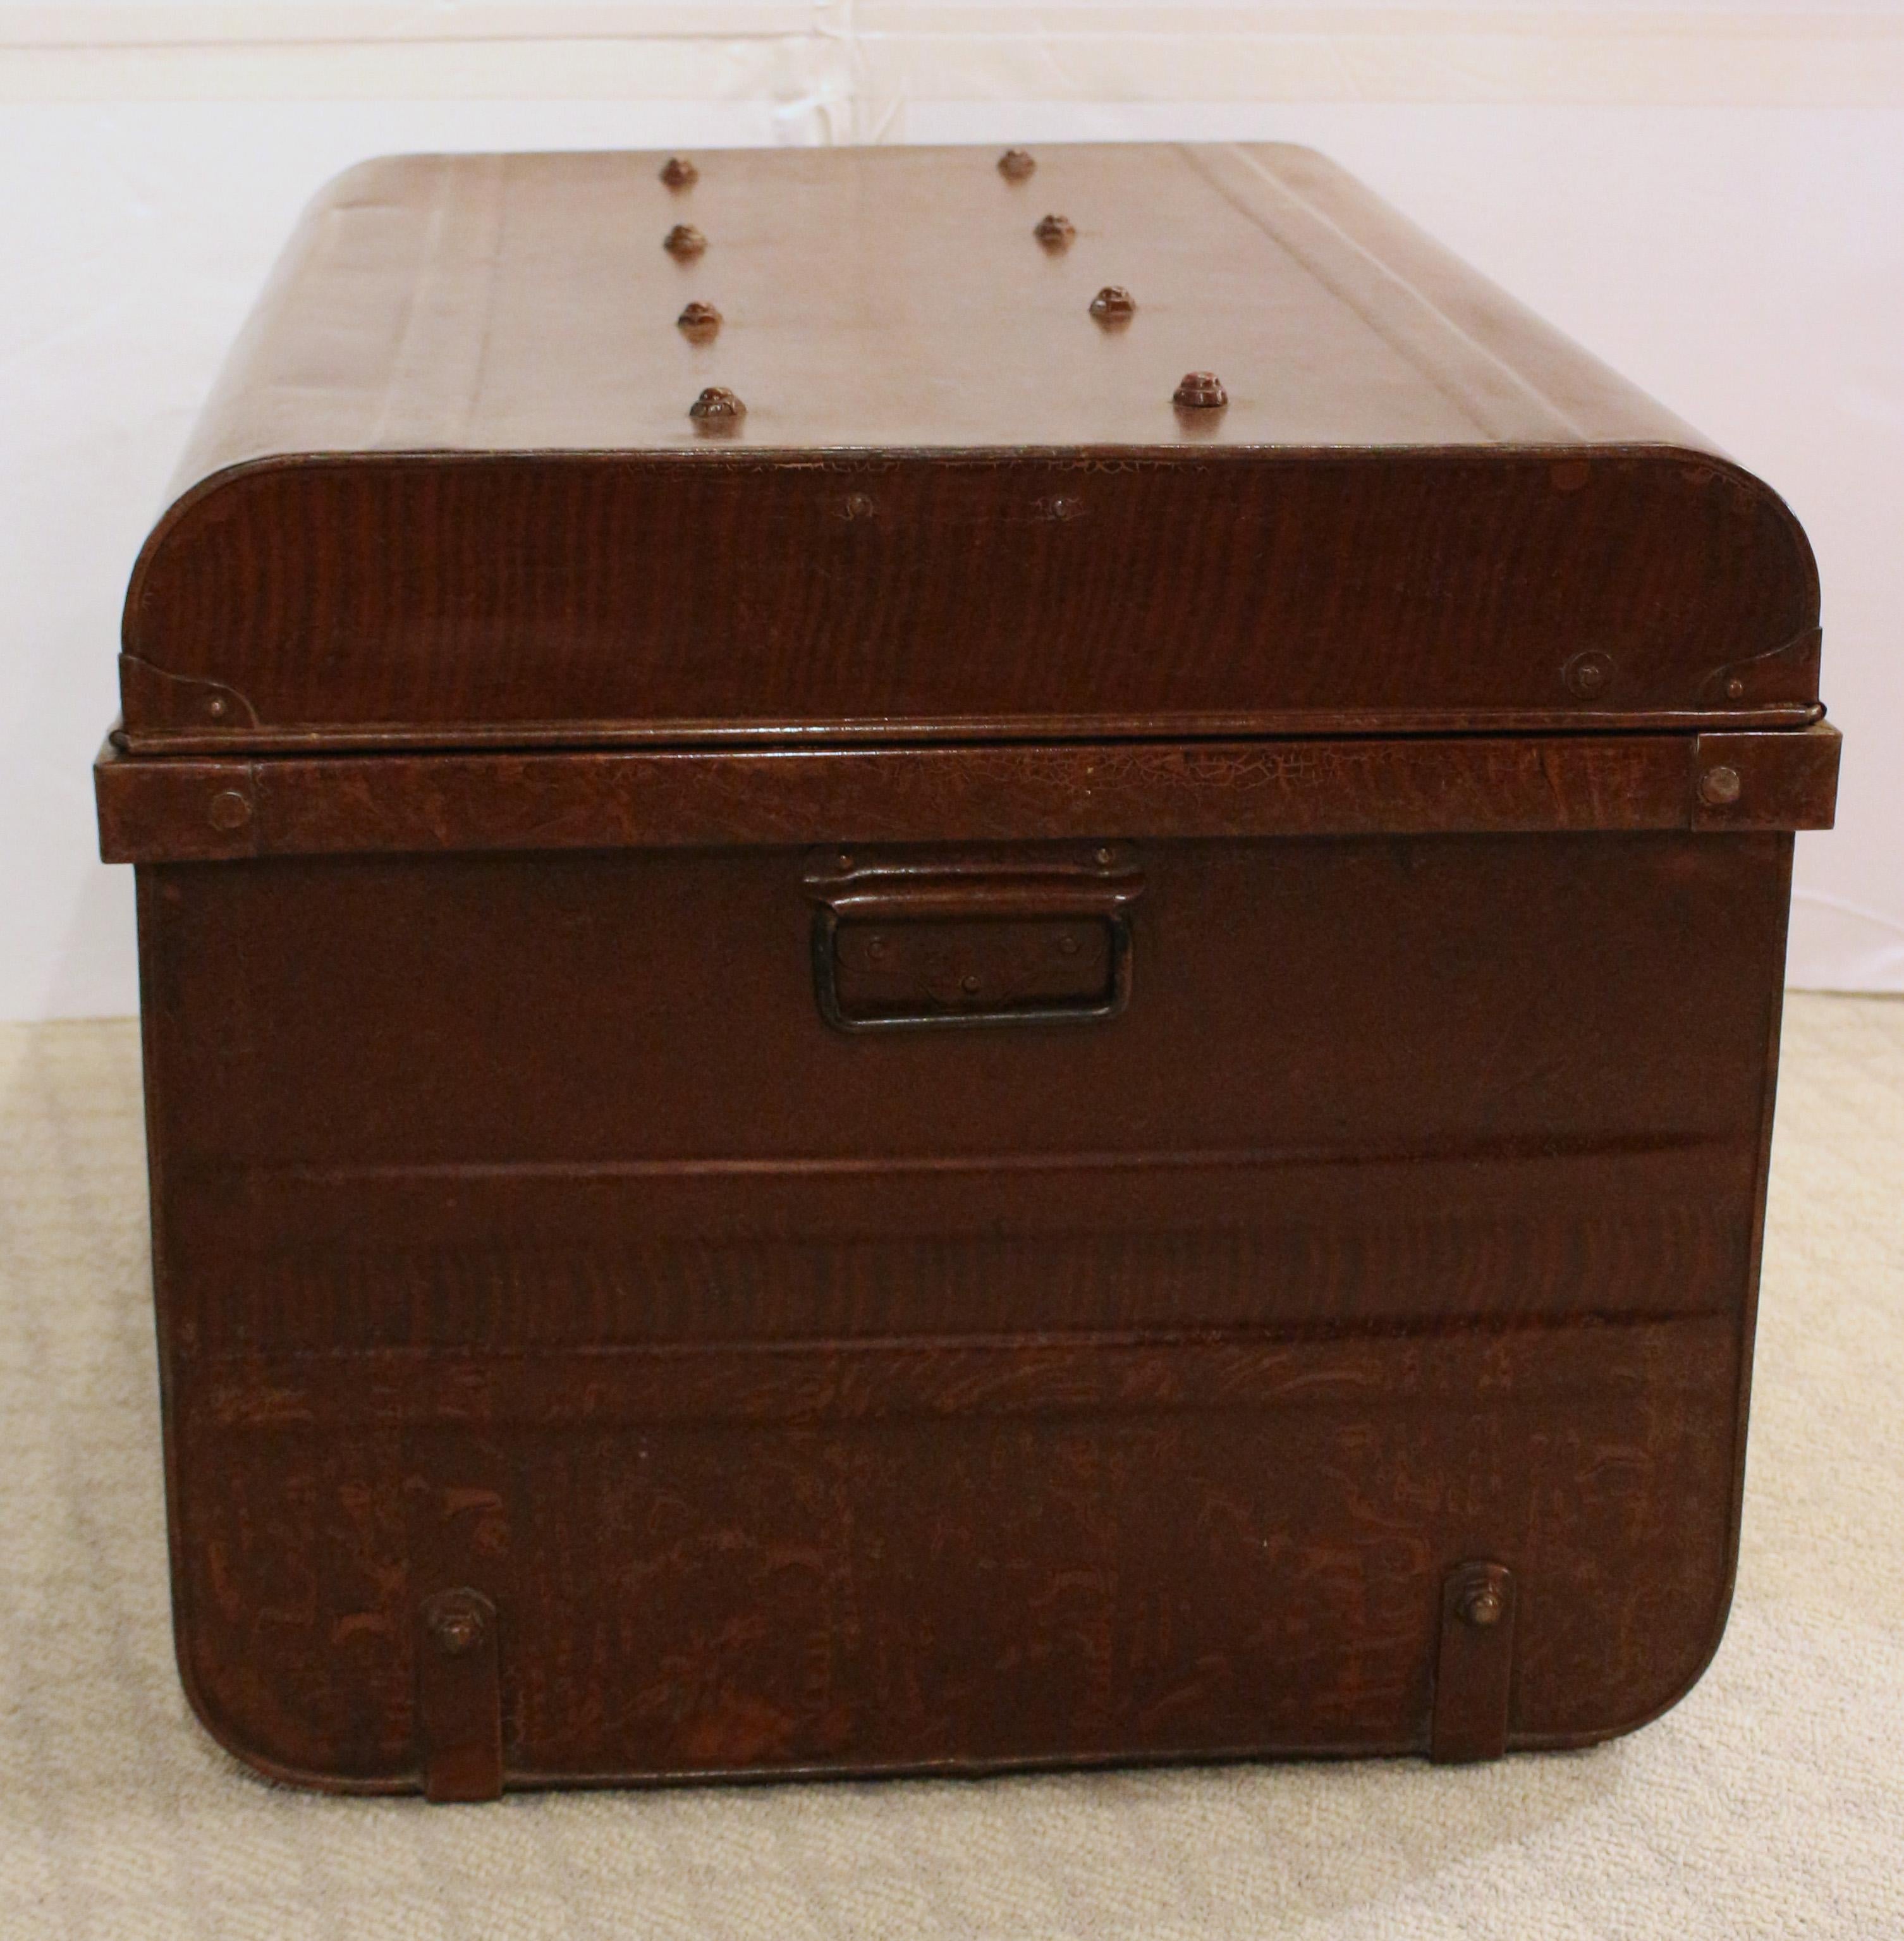 Other Late 19th-Early 20th Century Steel Trunk For Sale